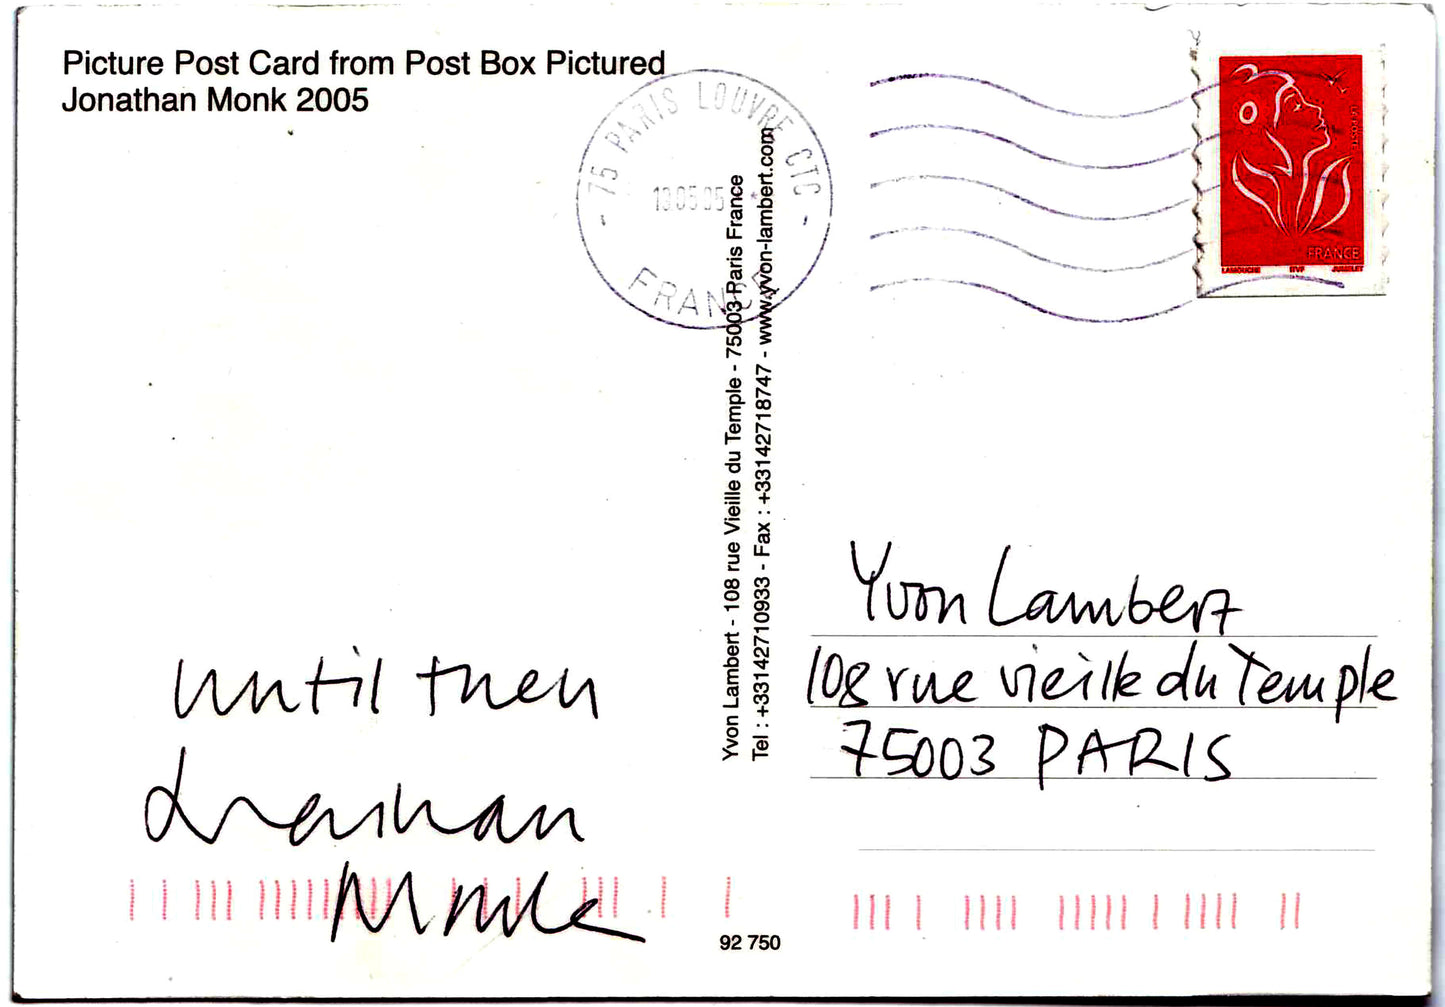 Jonathan Monk - Picture Post Card Posted from Post Box Pictured (Paris)